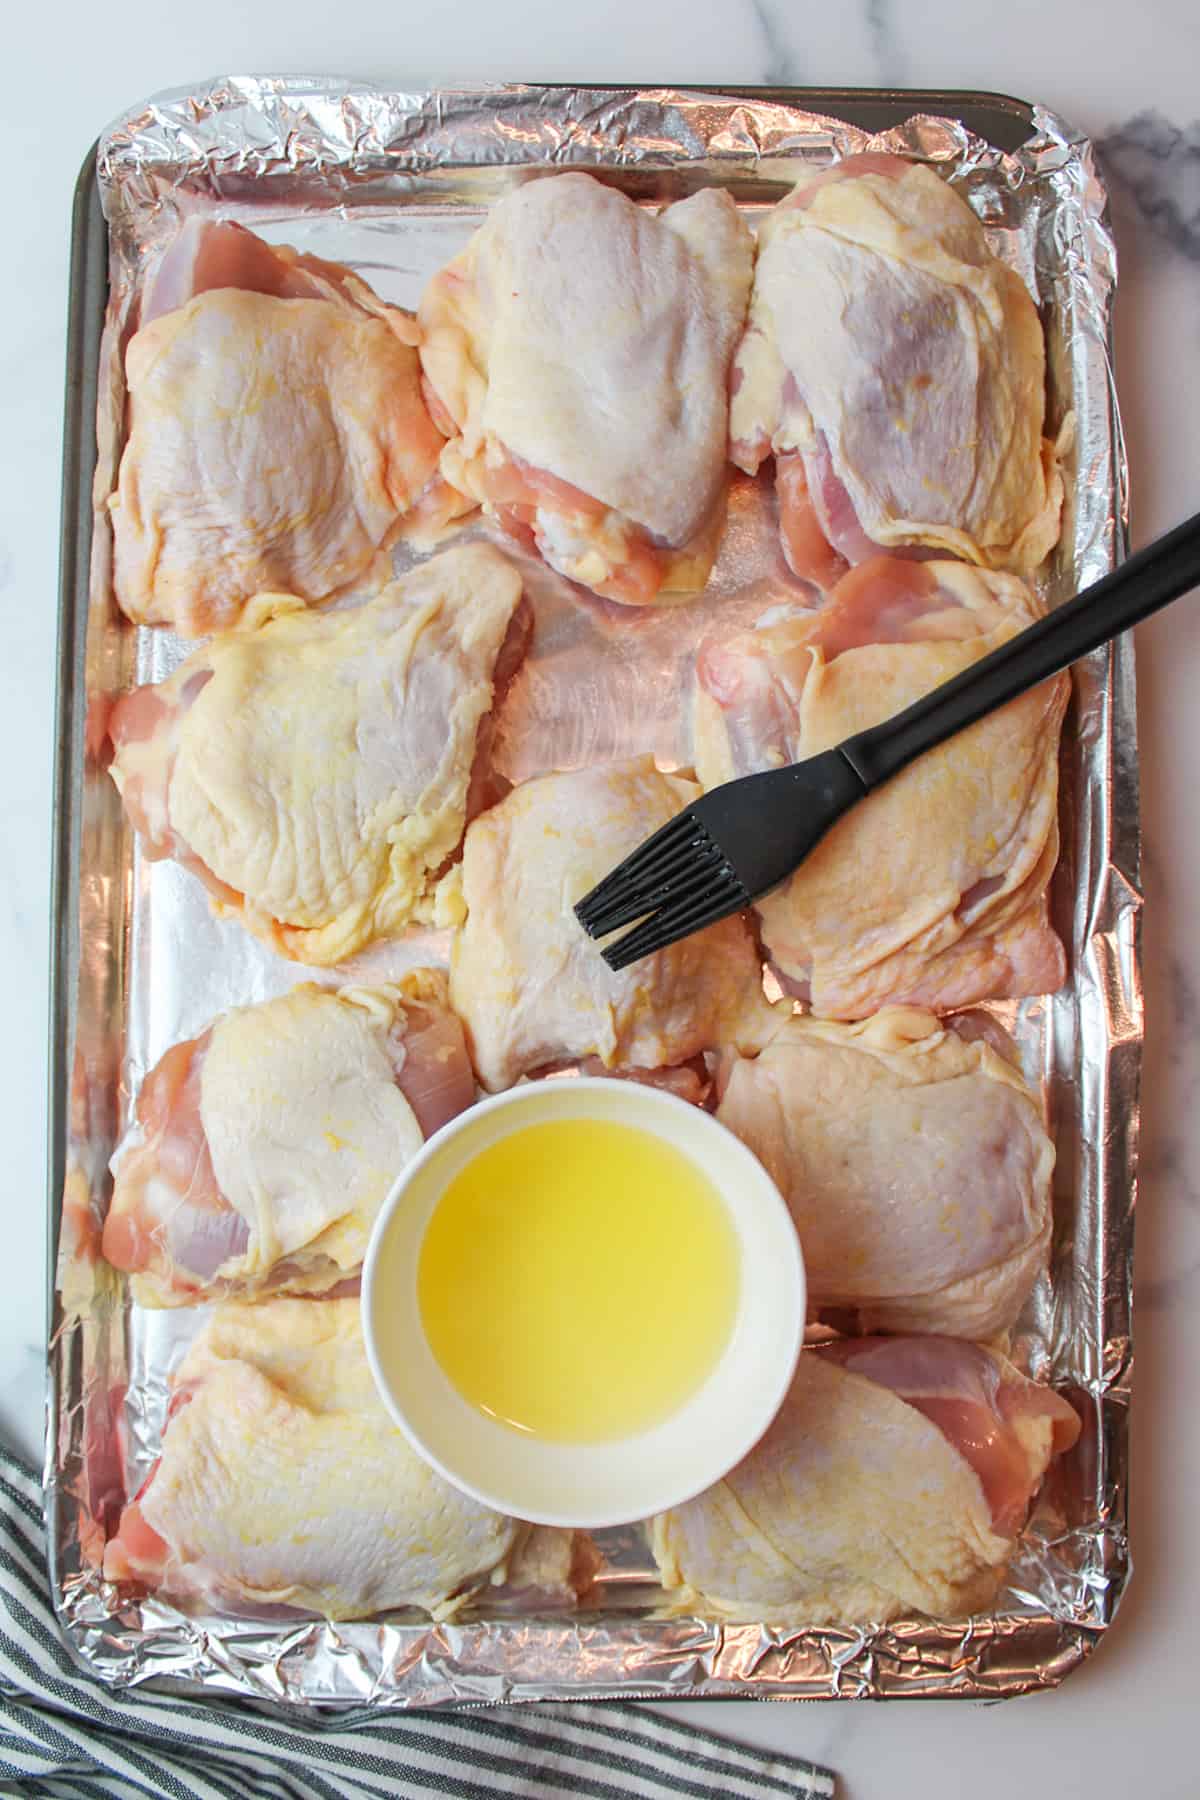 brushing olive oil over the top of the chicken thigh skin on a foil lined baking sheet